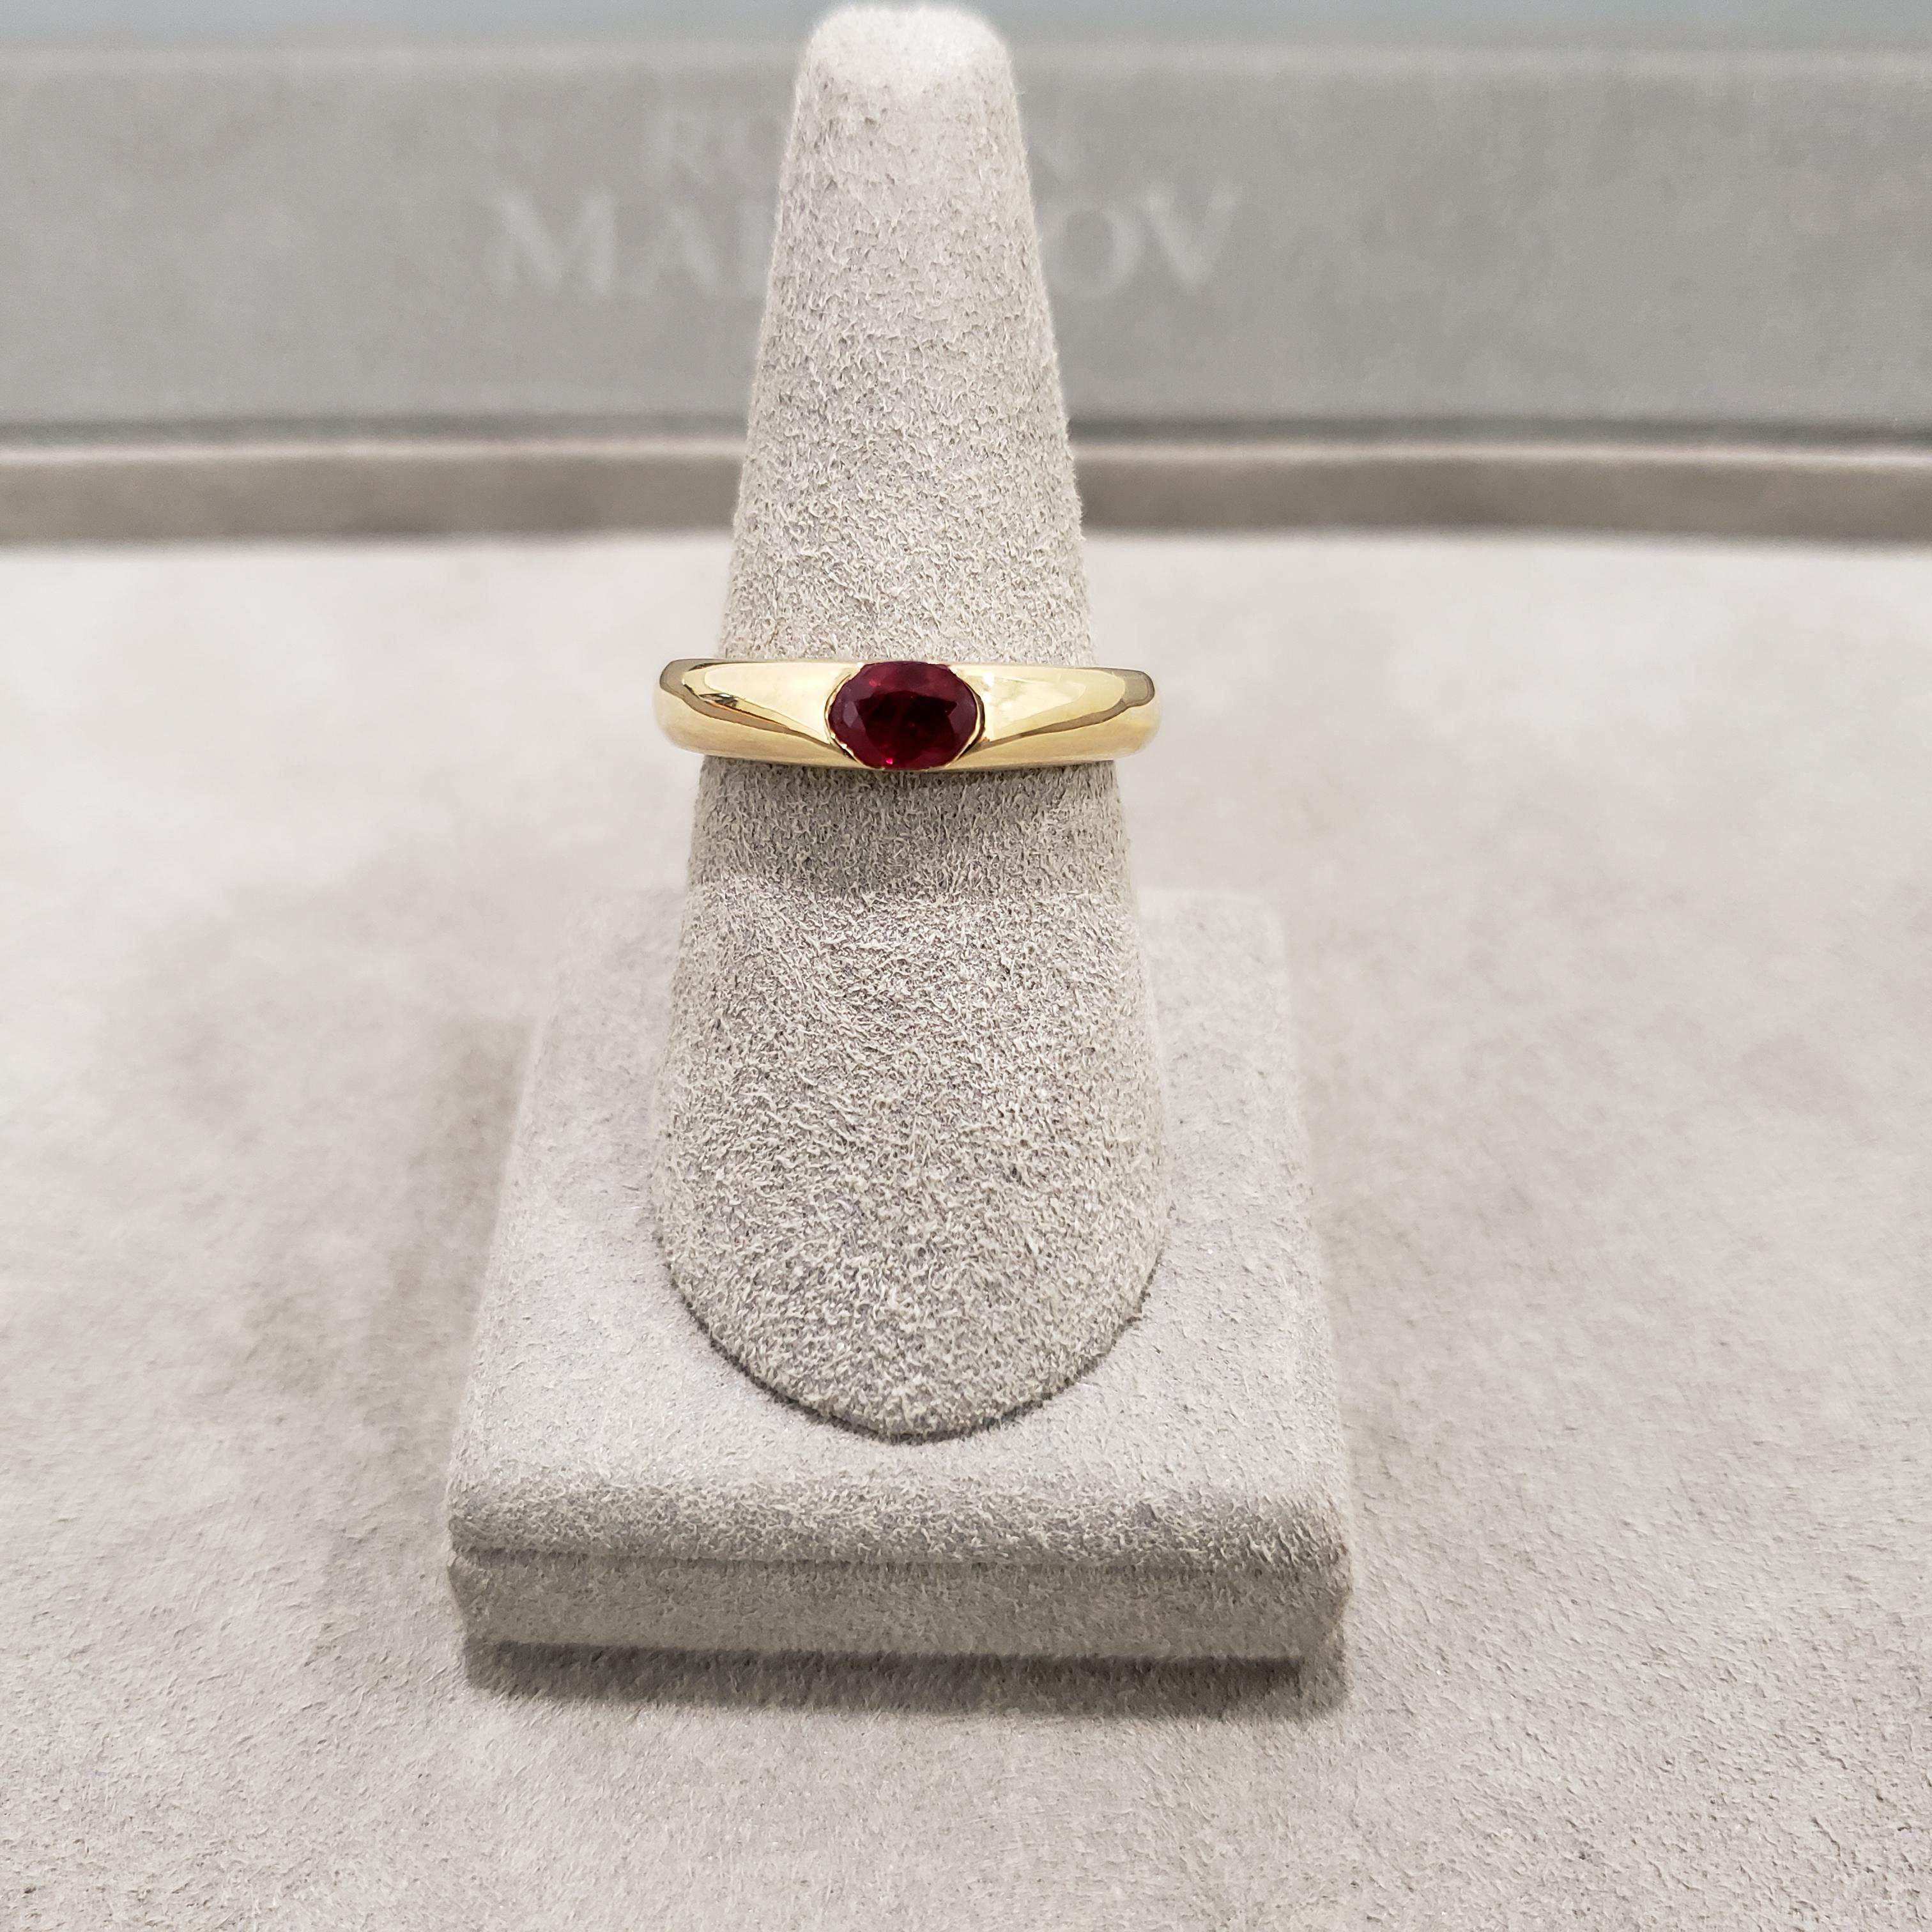 0.45 Carats Total Oval Cut Ruby Solitaire Wedding Band in Yellow Gold In Good Condition For Sale In New York, NY